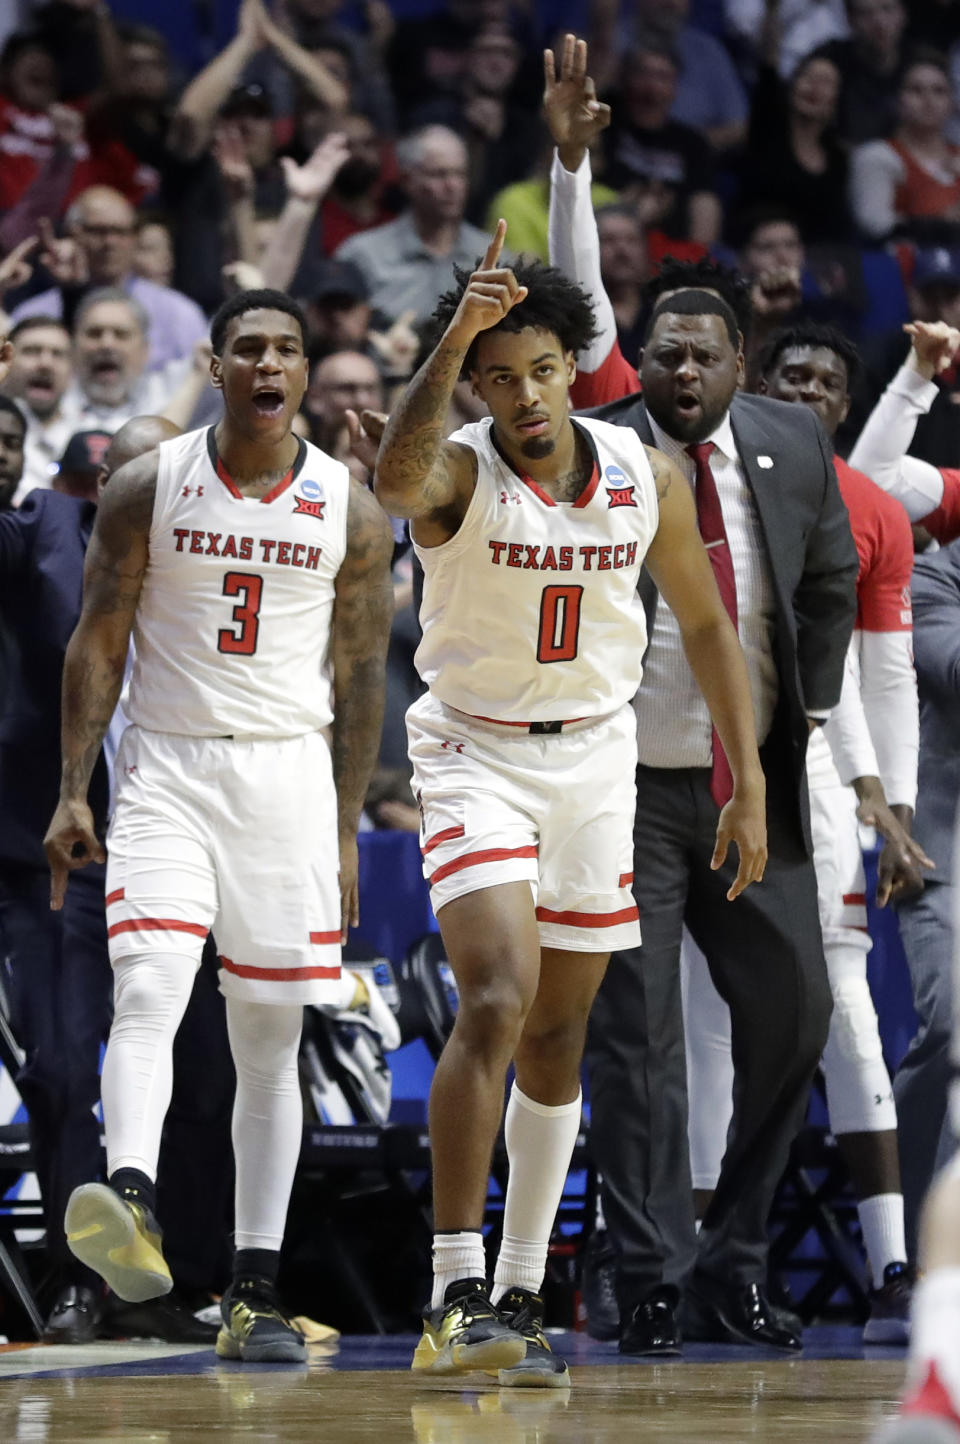 Texas Tech's Kyler Edwards (0) celebrates after making a 3-point basket as teammate Deshawn Corprew (3) cheers during the second half of a second round men's college basketball game against Buffalo in the NCAA Tournament Sunday, March 24, 2019, in Tulsa, Okla. (AP Photo/Jeff Roberson)